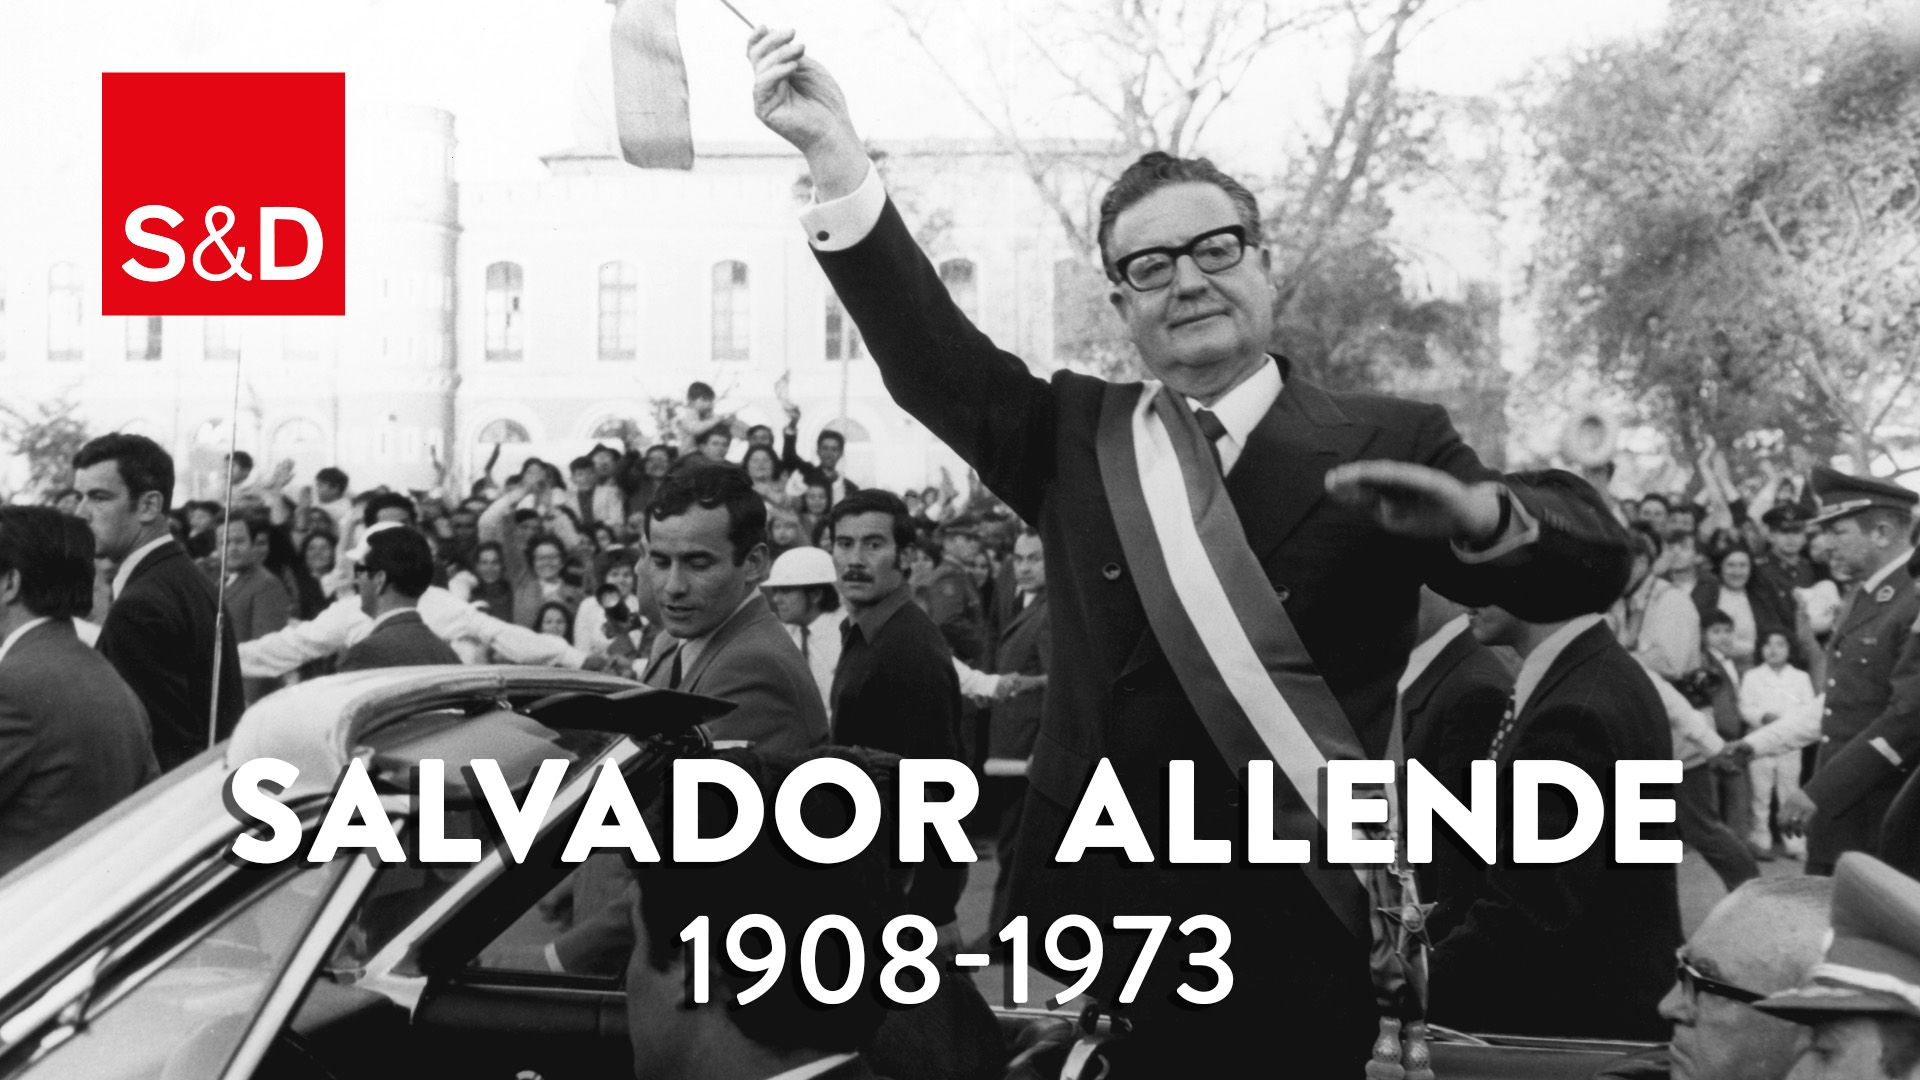 50th anniversary of the death of President Salvador Allende